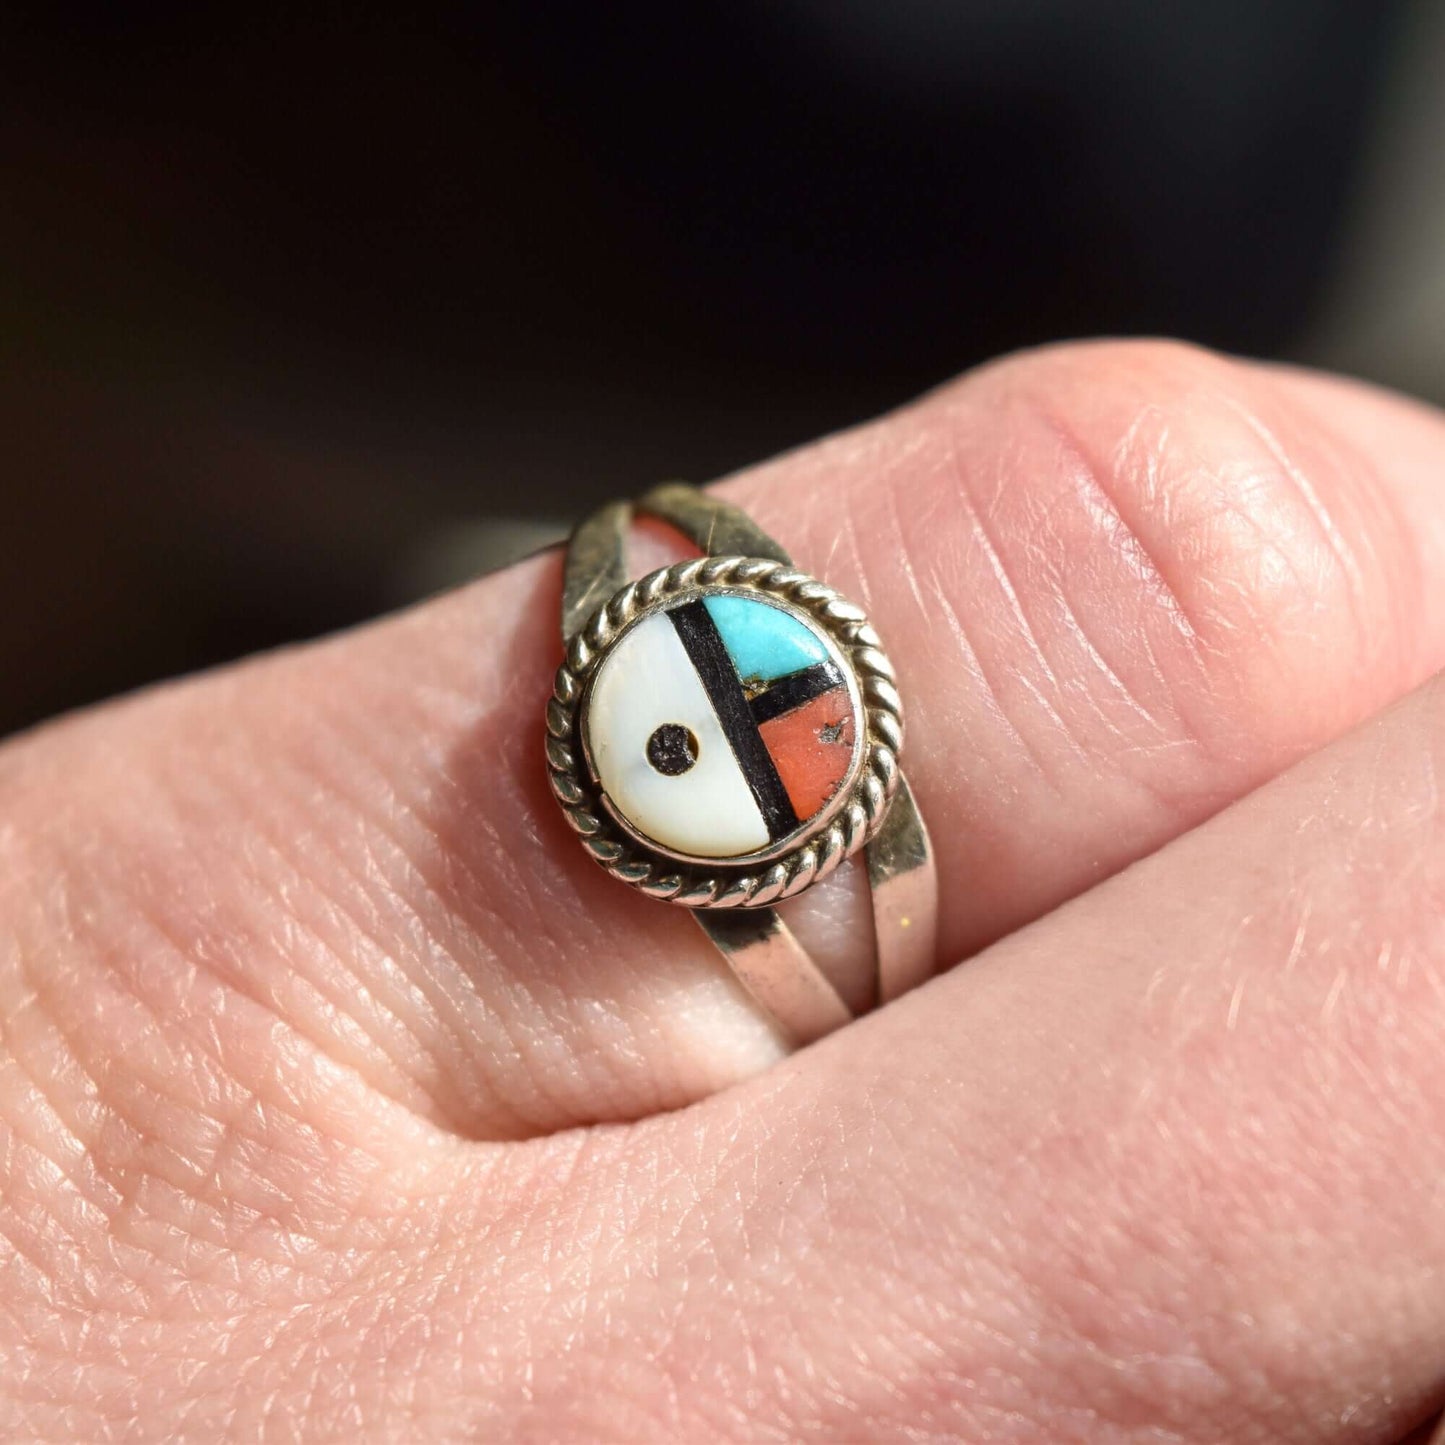 Sterling silver Little Zuni Sun Face ring with inlaid stone details worn on finger, Native American jewelry, size 5.25 US, shown for stacking ring inspiration.